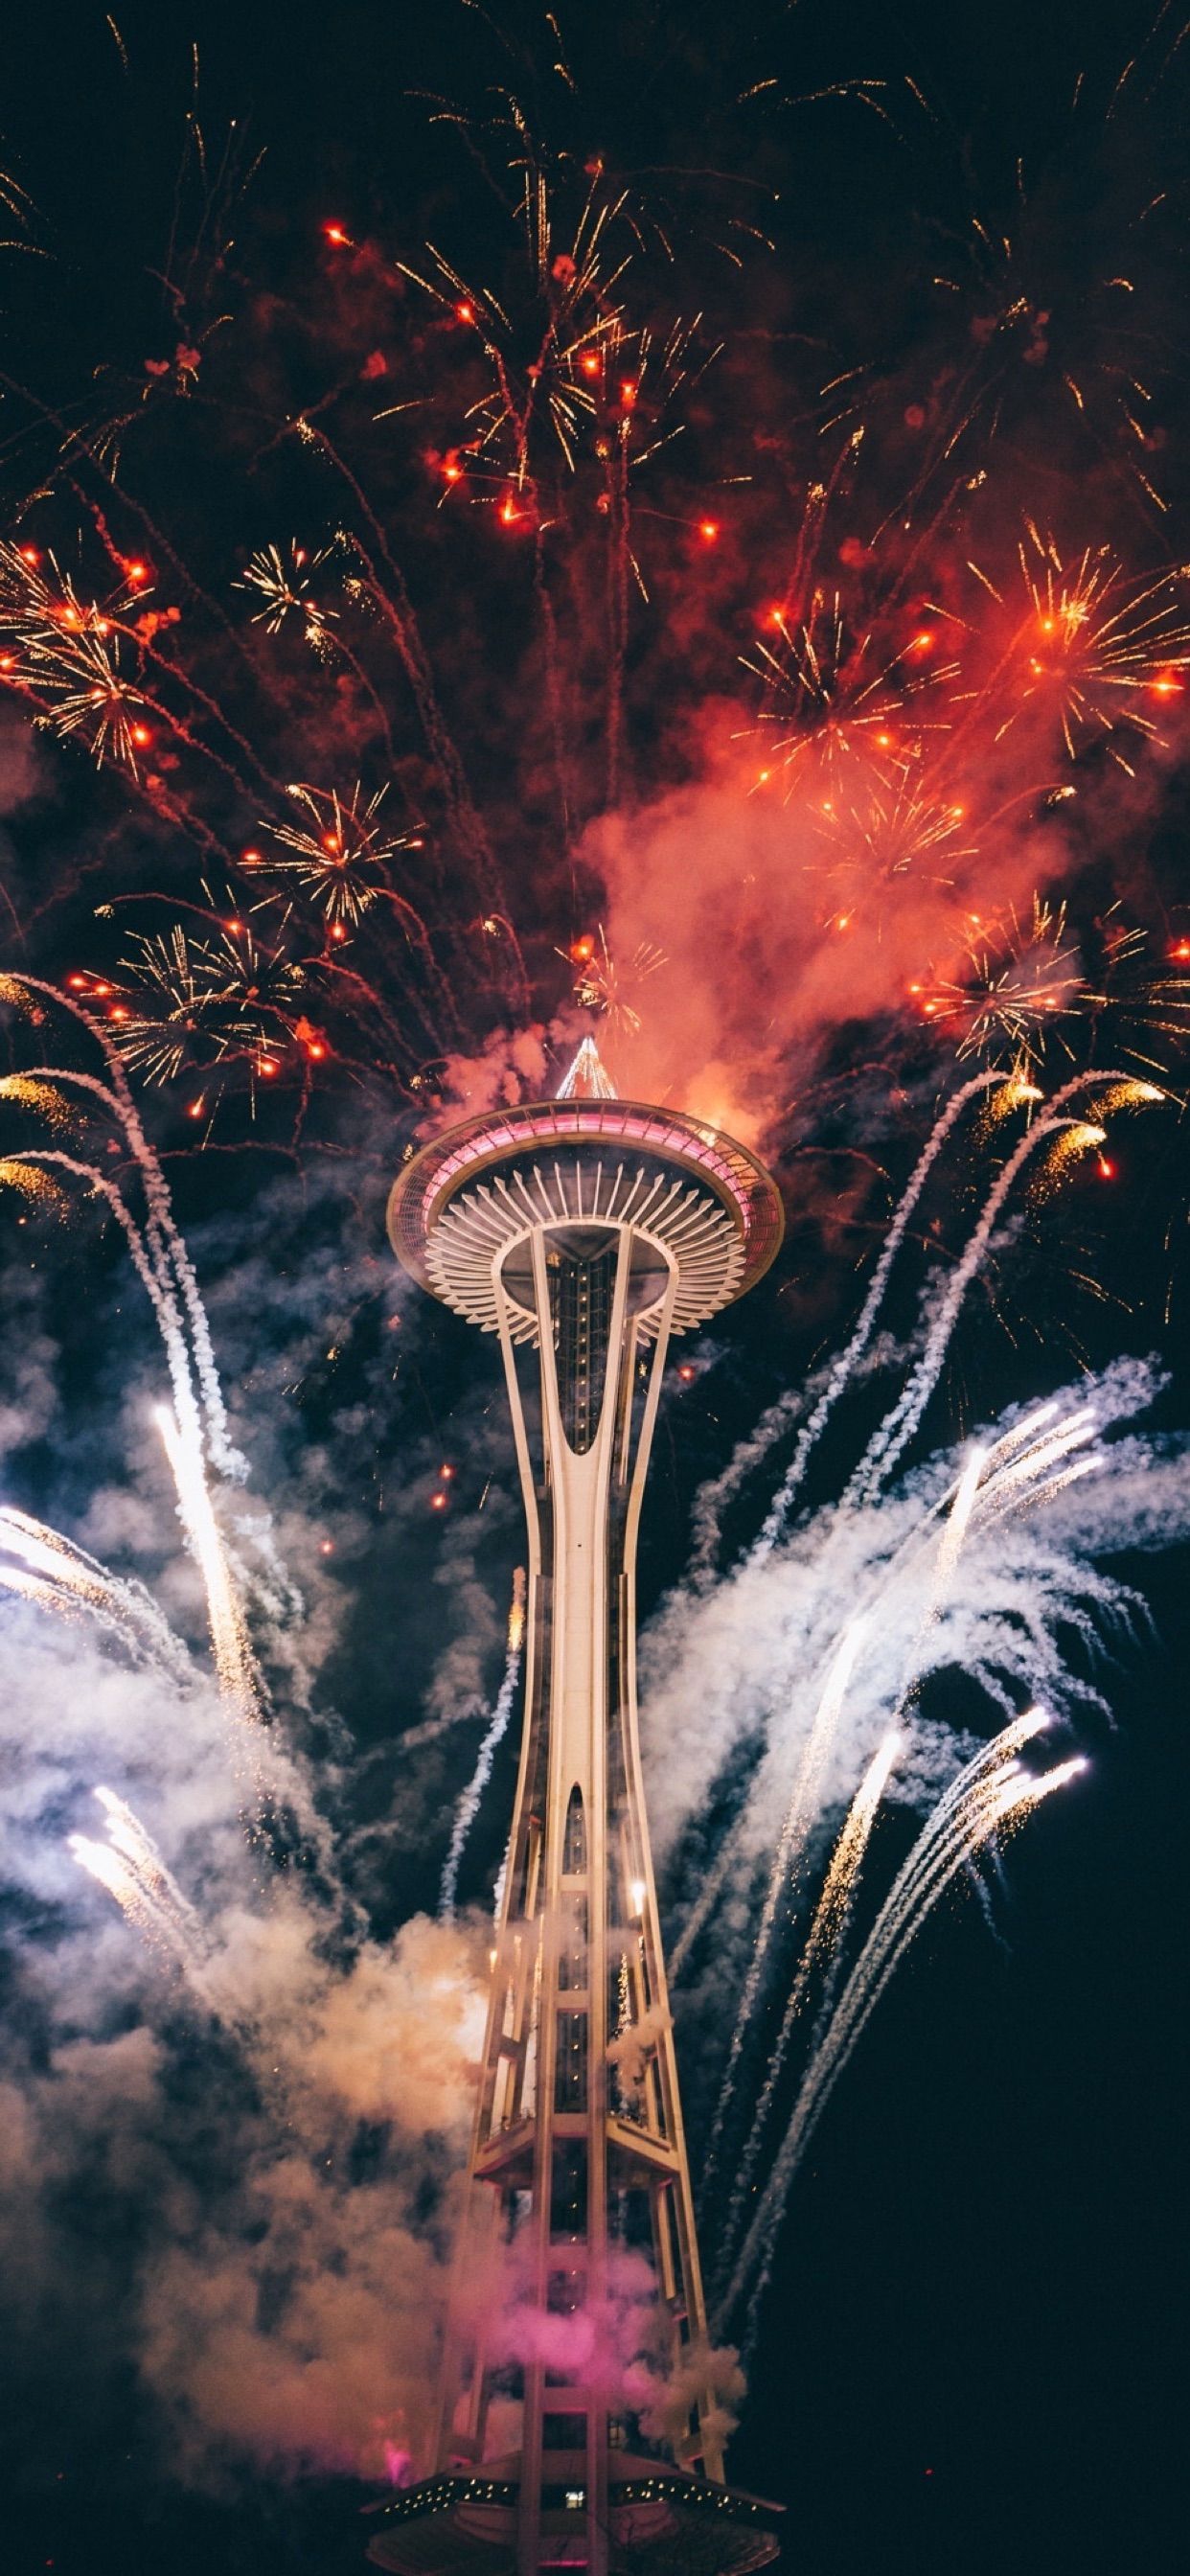 Fireworks light up the sky behind the Space Needle in Seattle. - New Year